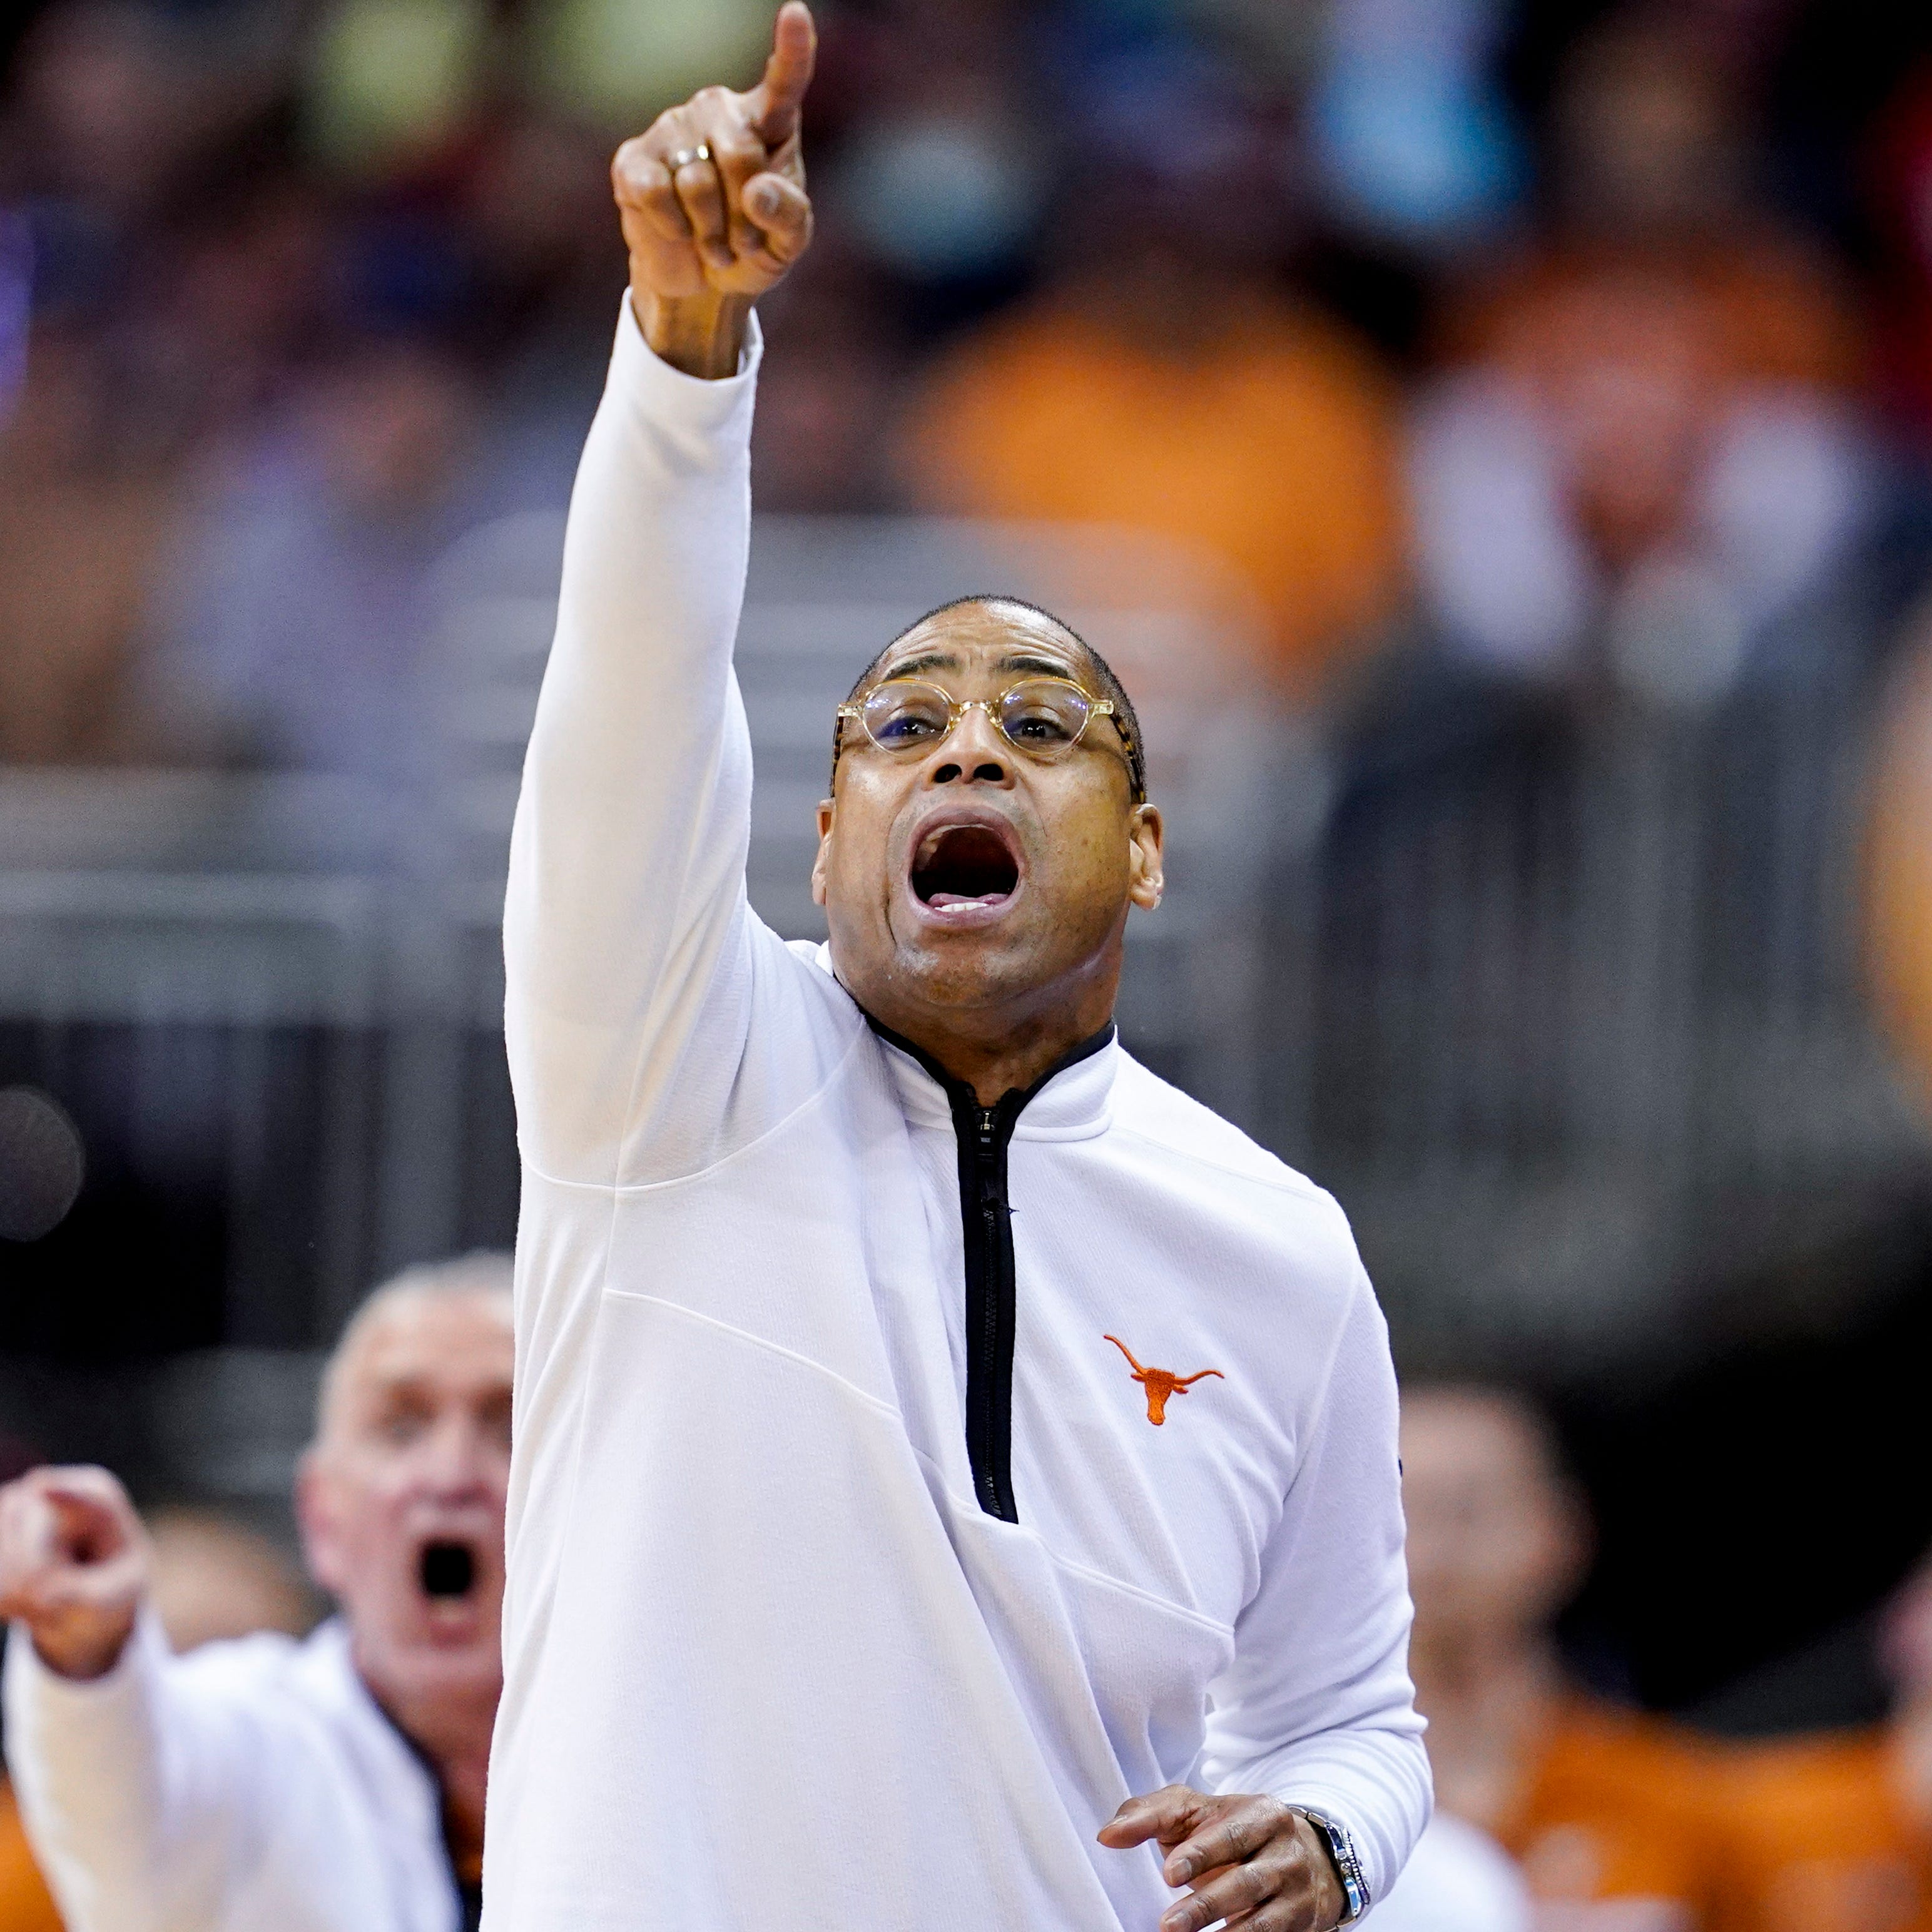 Texas coach Rodney Terry yells to his team during their game against Miami (Fla.) in the Midwest Regional championship game of the NCAA men's tournament at the T-Mobile Center.